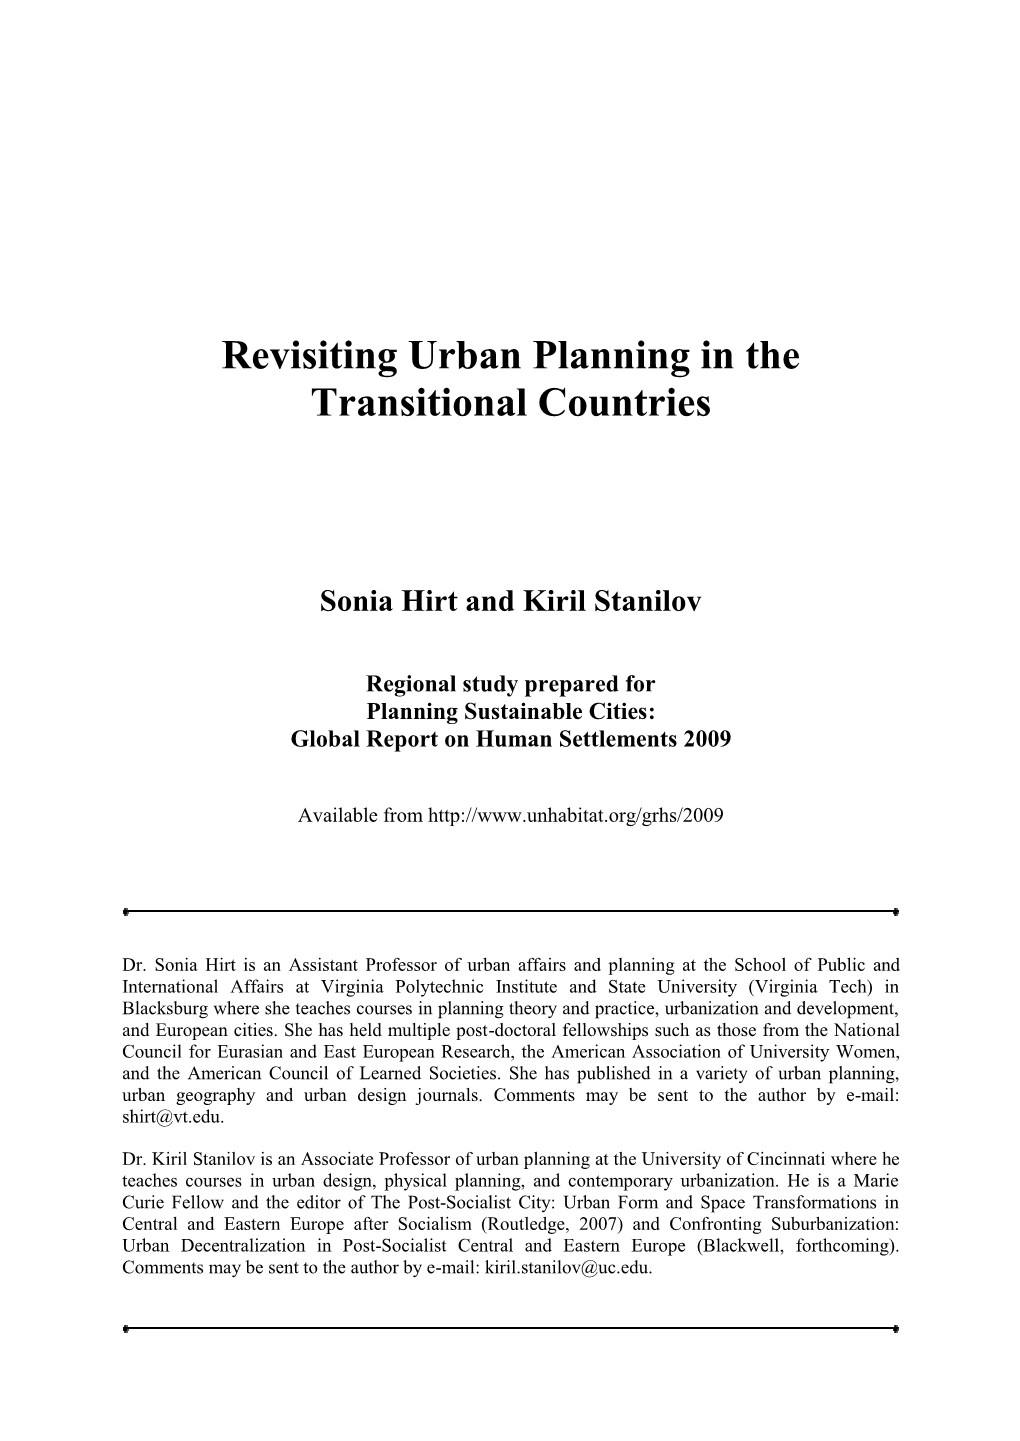 Revisiting Urban Planning in the Transitional Countries